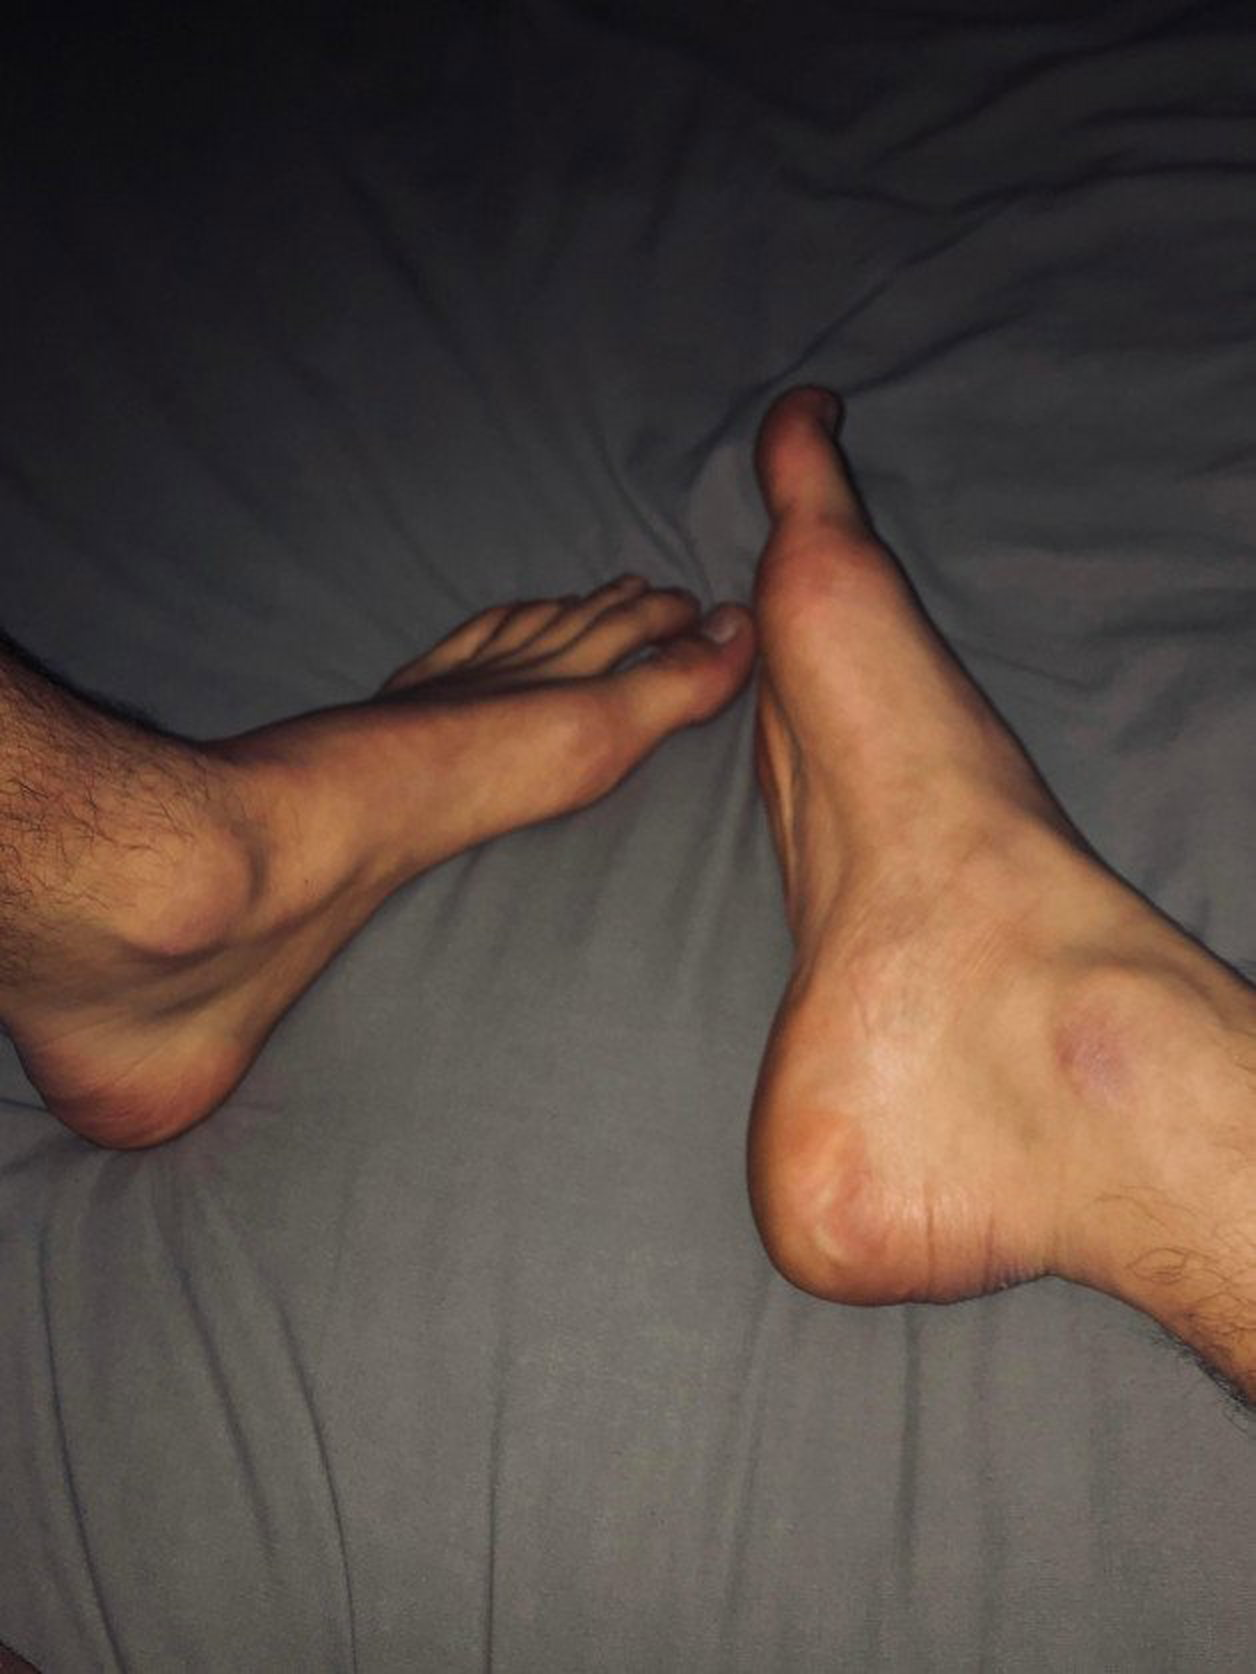 Photo by Allseeingeye666 with the username @Allseeingeye666,  April 10, 2021 at 2:19 PM. The post is about the topic Foot Worship and the text says 'Sir could do with a rub down...'